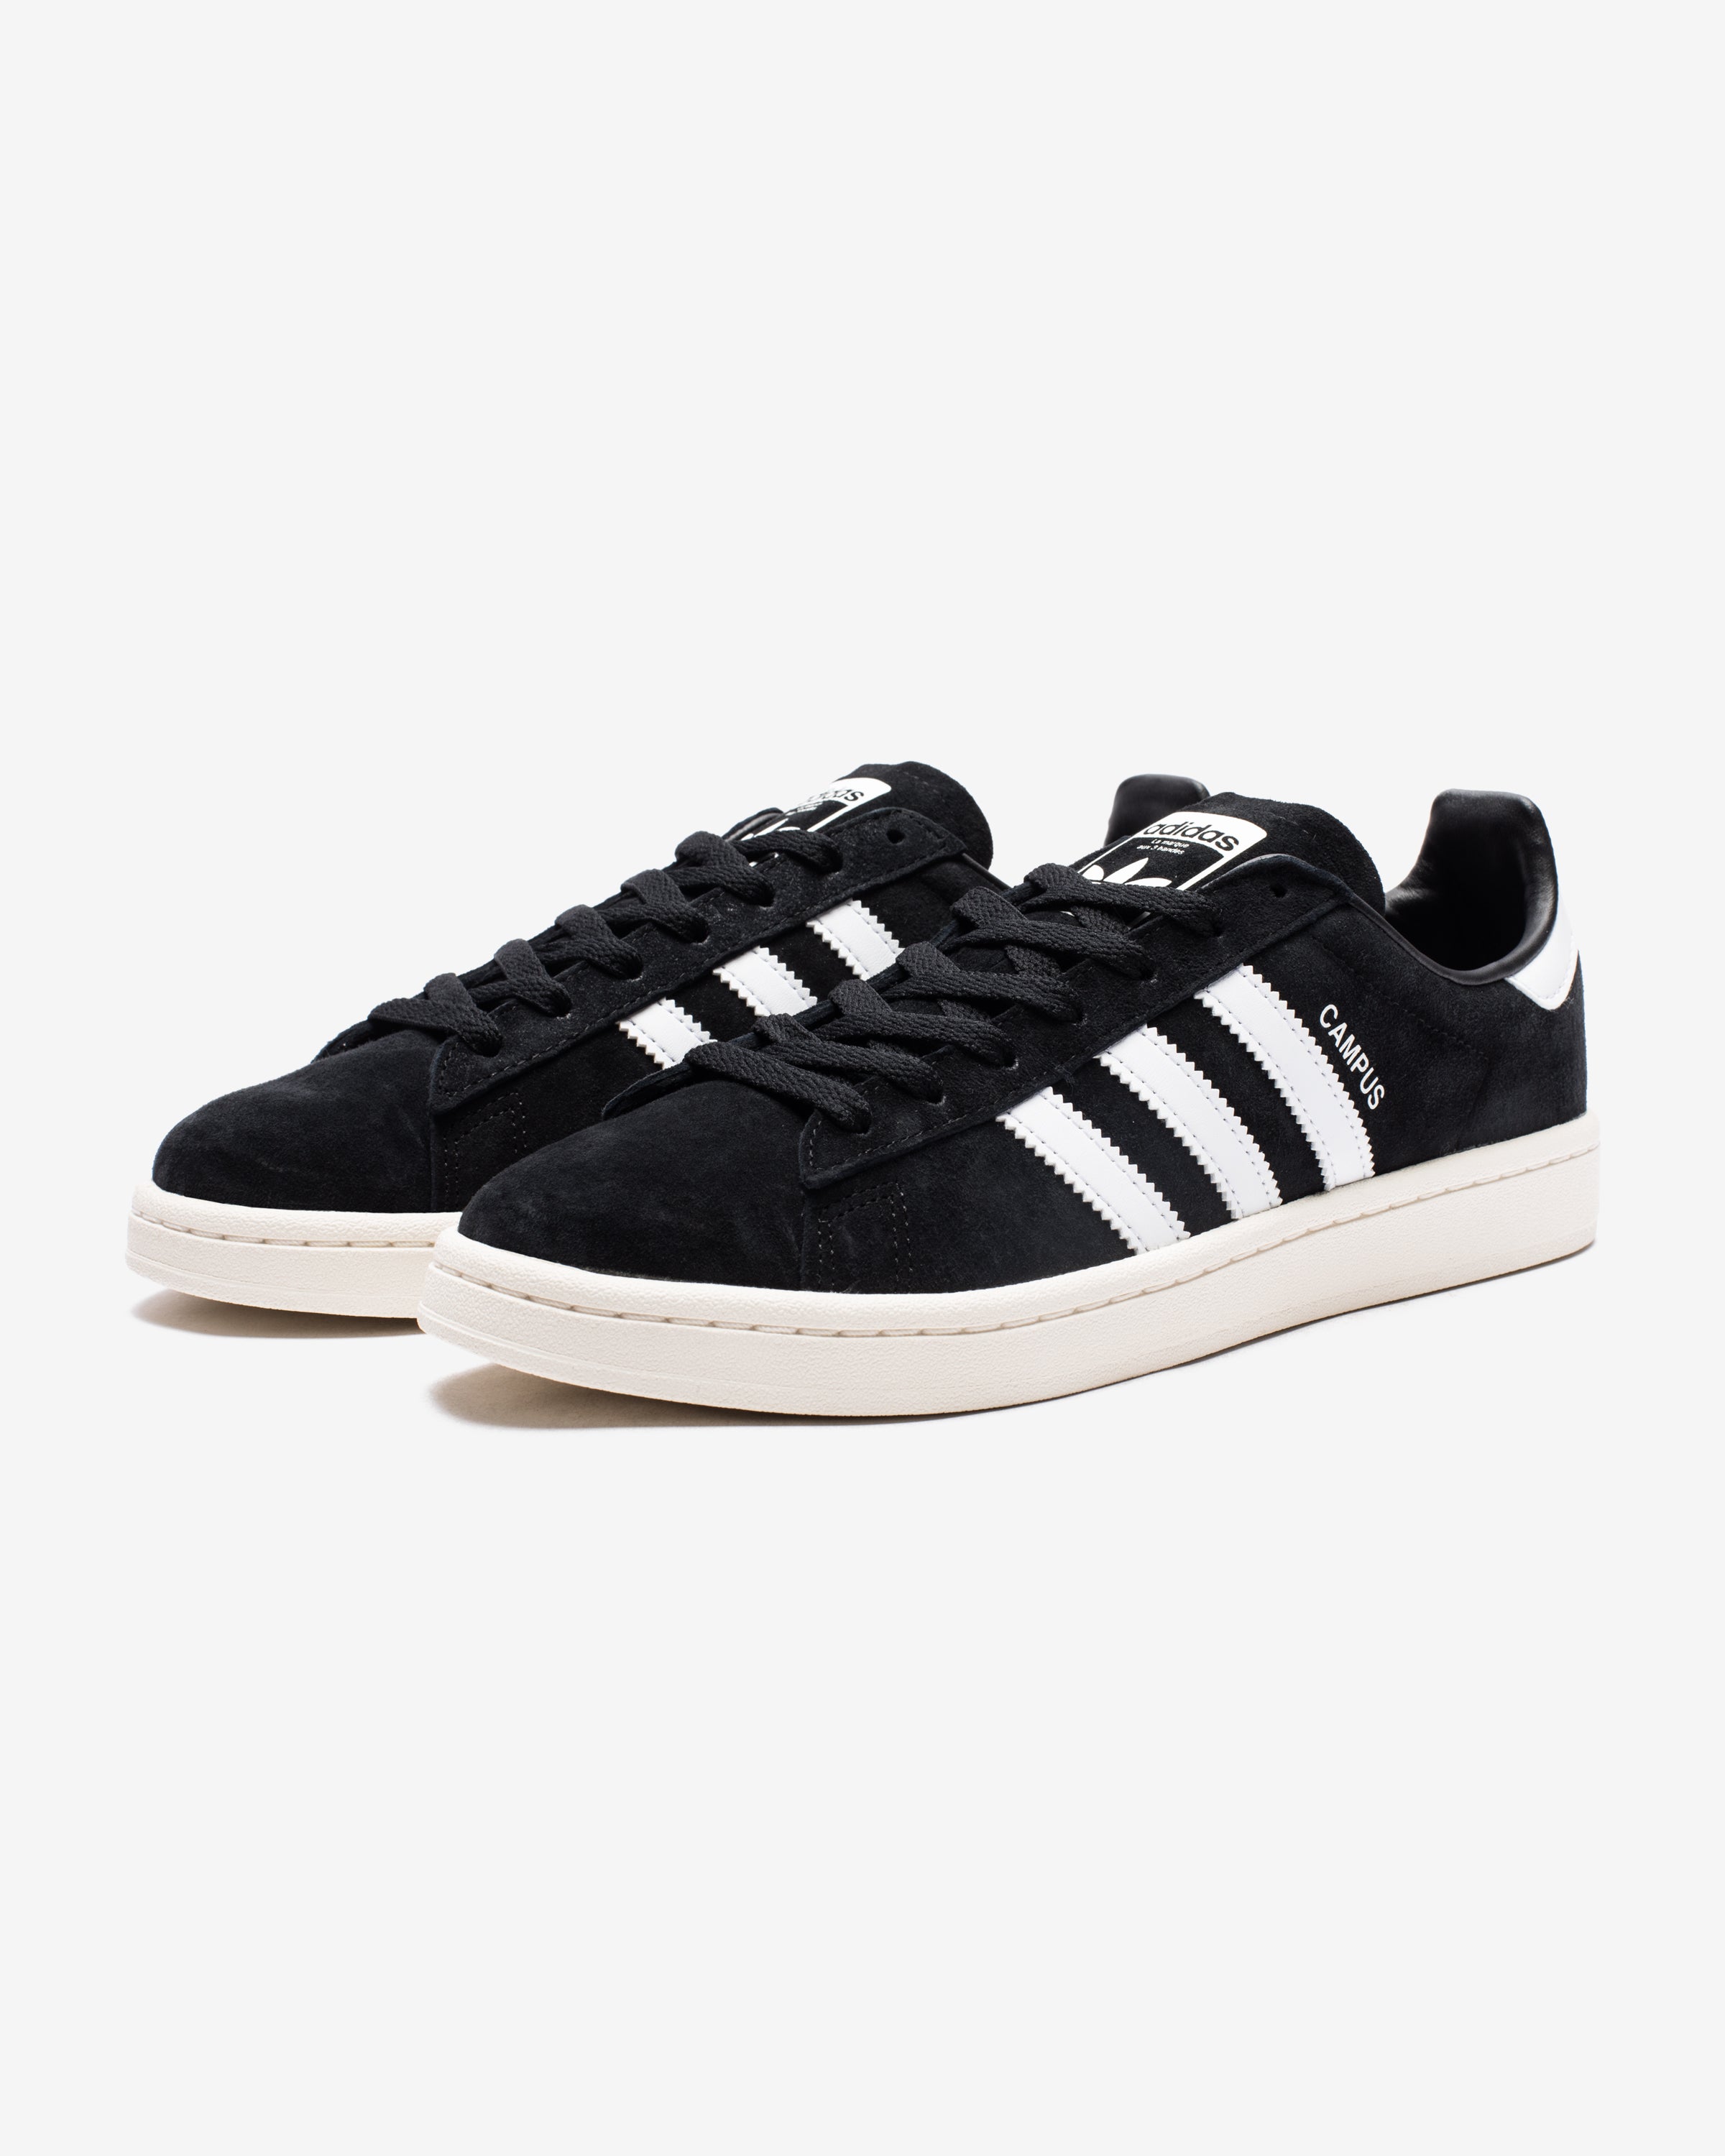 ADIDAS CAMPUS - CBLACK/ FTWWHT/ CWHITE – Undefeated | Sneaker low